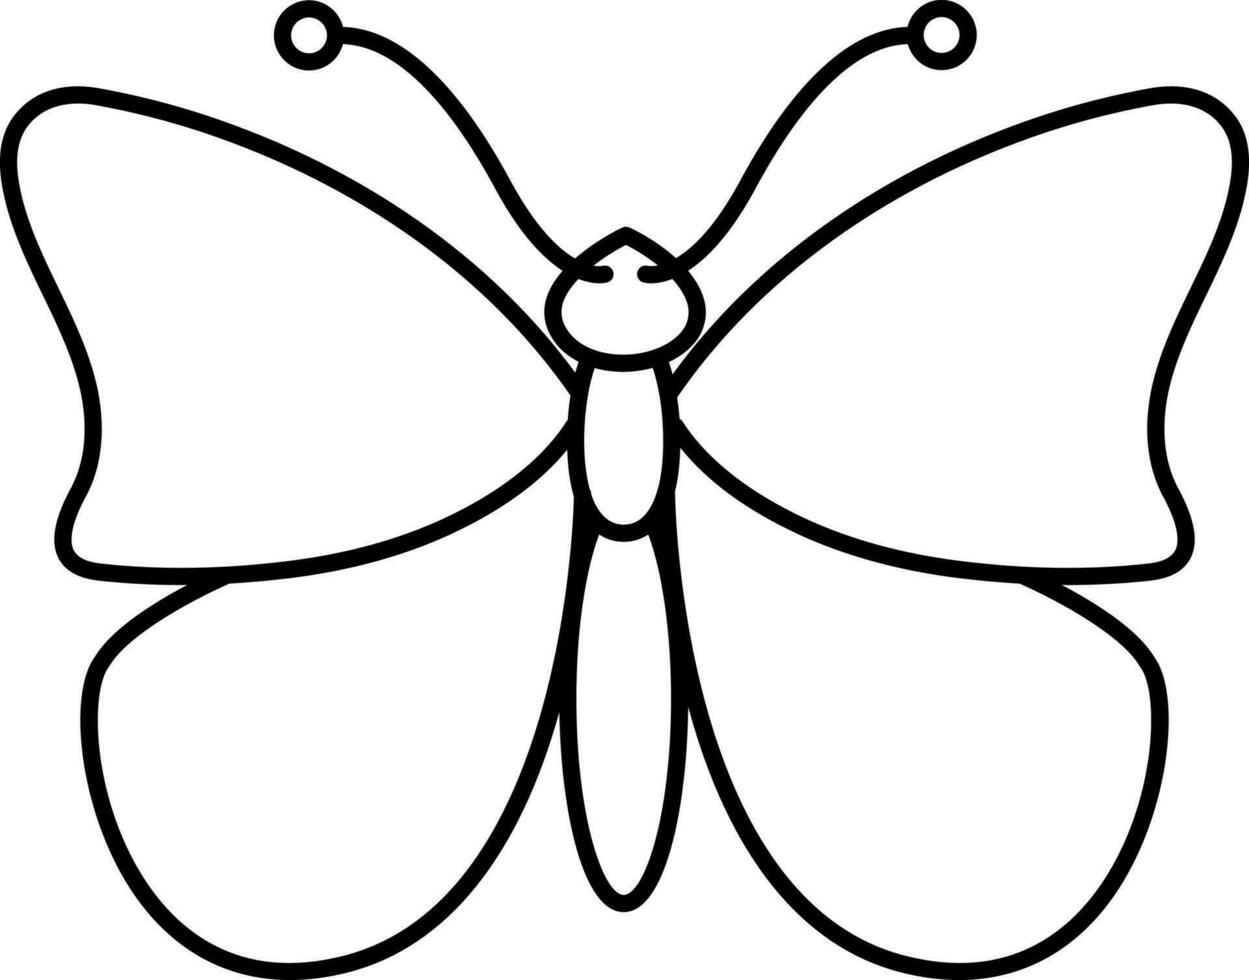 Isolated Flying Butterfly Icon In Stroke Style. vector